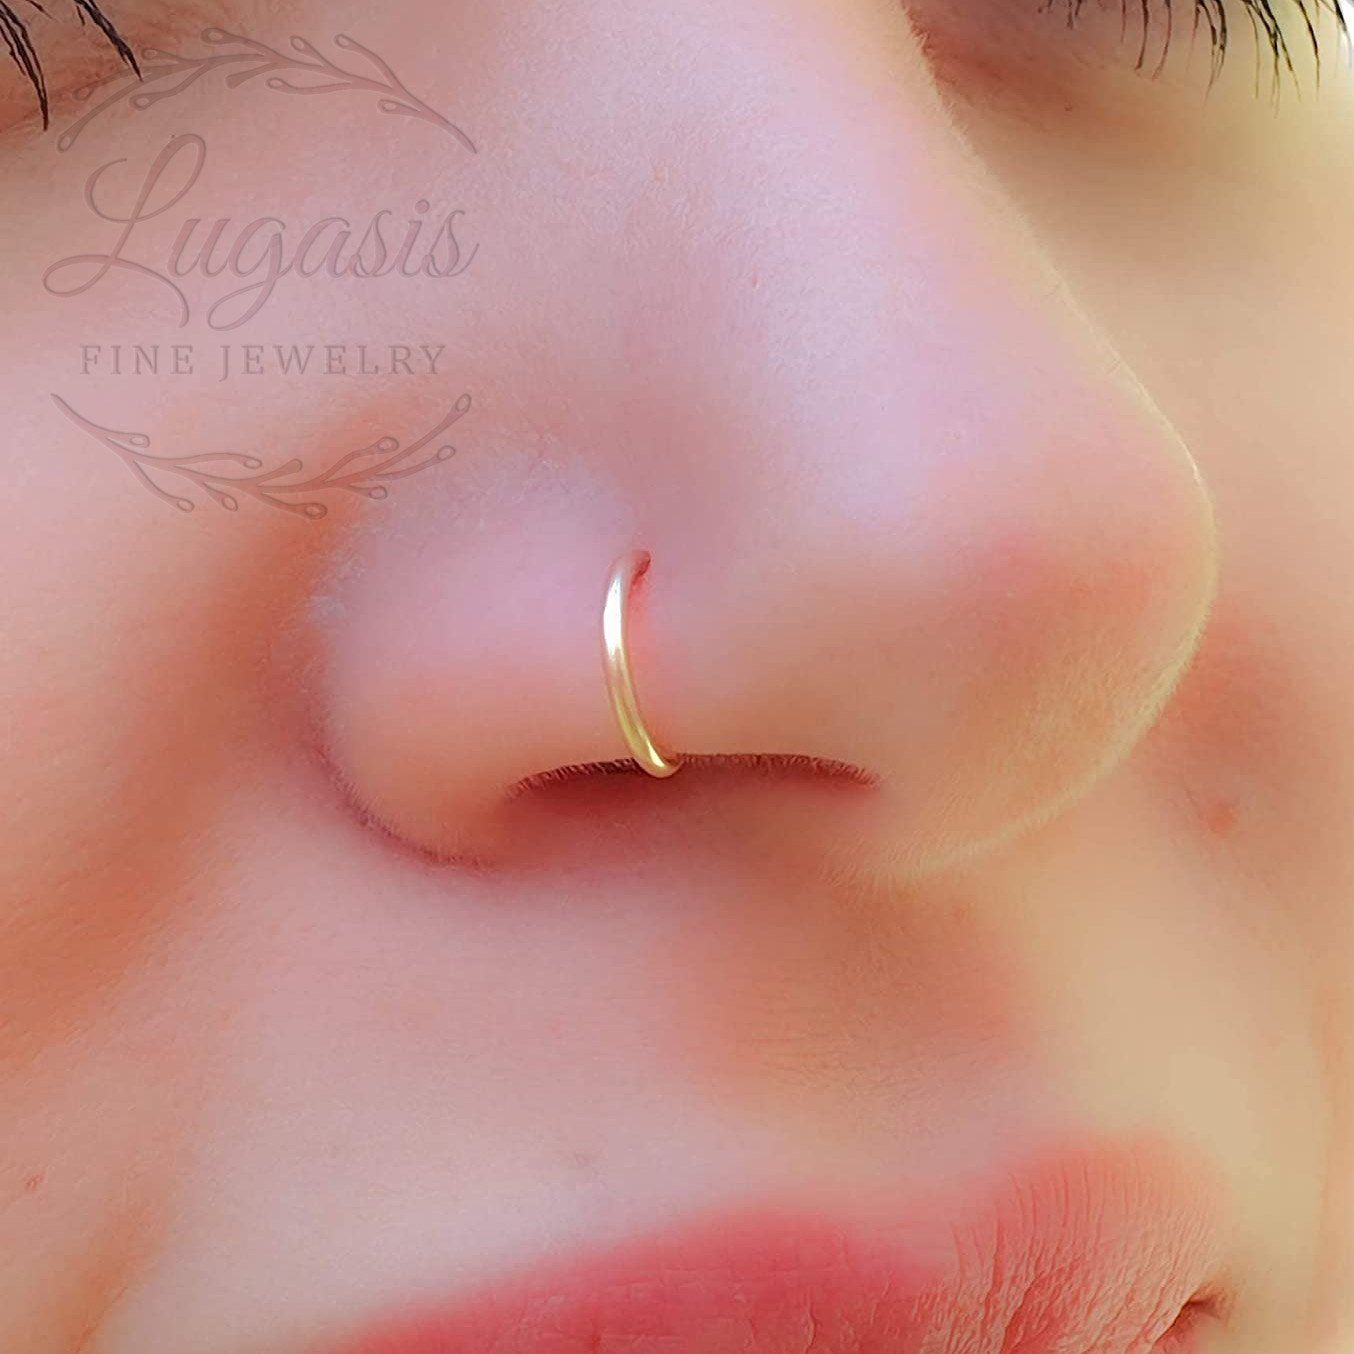 Amazon.com: Gold Nose Ring - Handmade Comfortable 14k Gold Nose Ring with a  Cute 2mm Gold Bead - Hypoallergenic 7mm Thin 24 Guage Gold Piercing Hoop :  Handmade Products